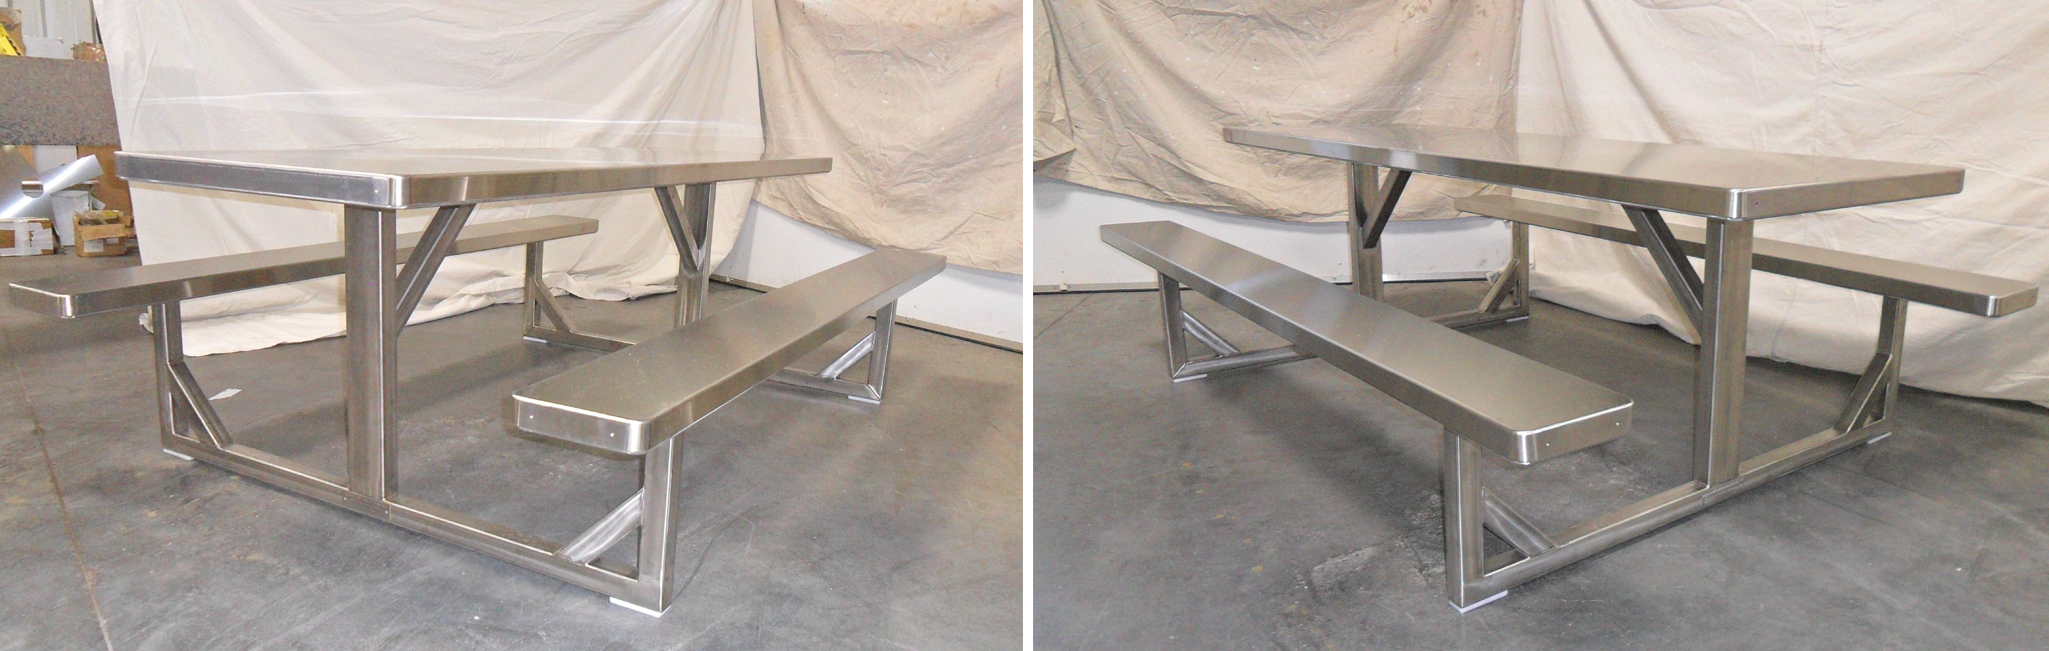 8 FT Stainless Steel Table | Bright Industrial Innovations, LLC Stainless Steel Table 8 Ft